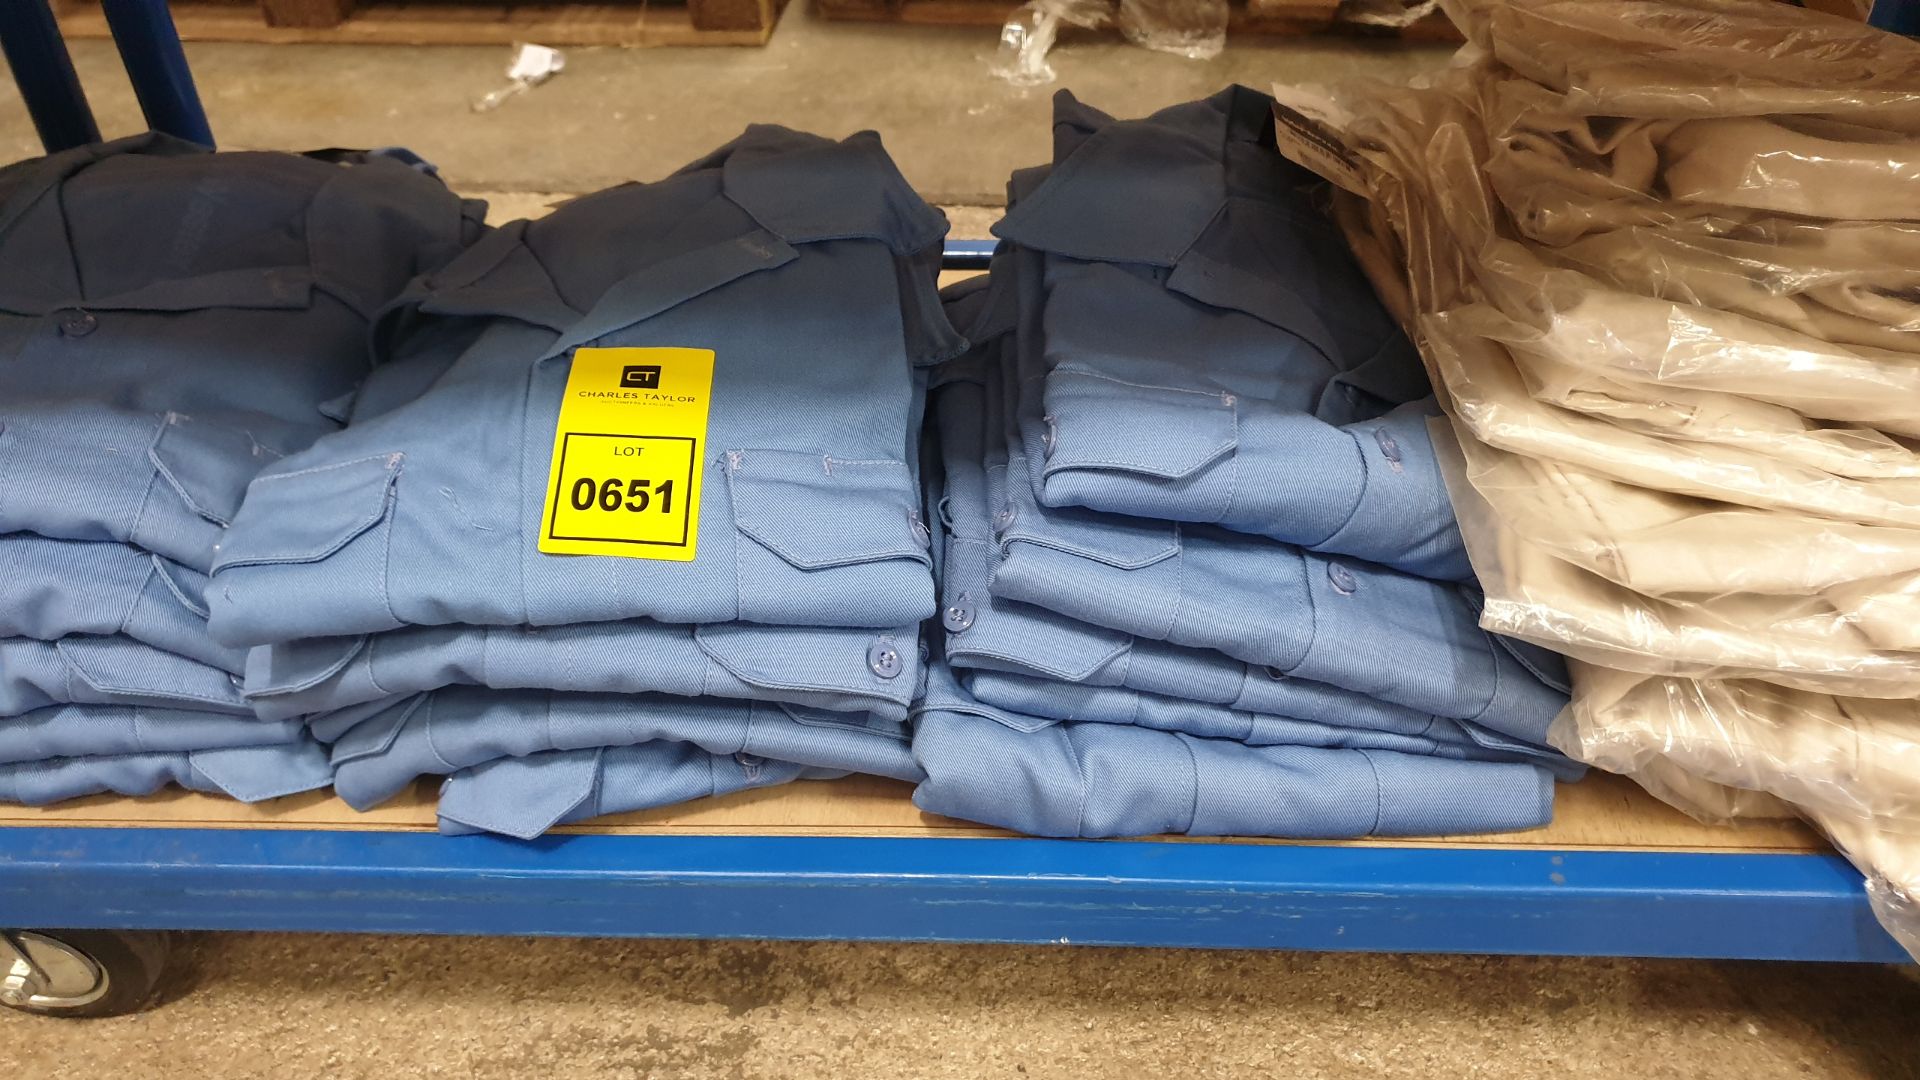 15 X WESTEX ULTRASOFT WORKRITE FR WORK SHIRTS IN BLUE SIZES MAINLY 46R AND 50R PLUS 13 BEIGE SHIRTS